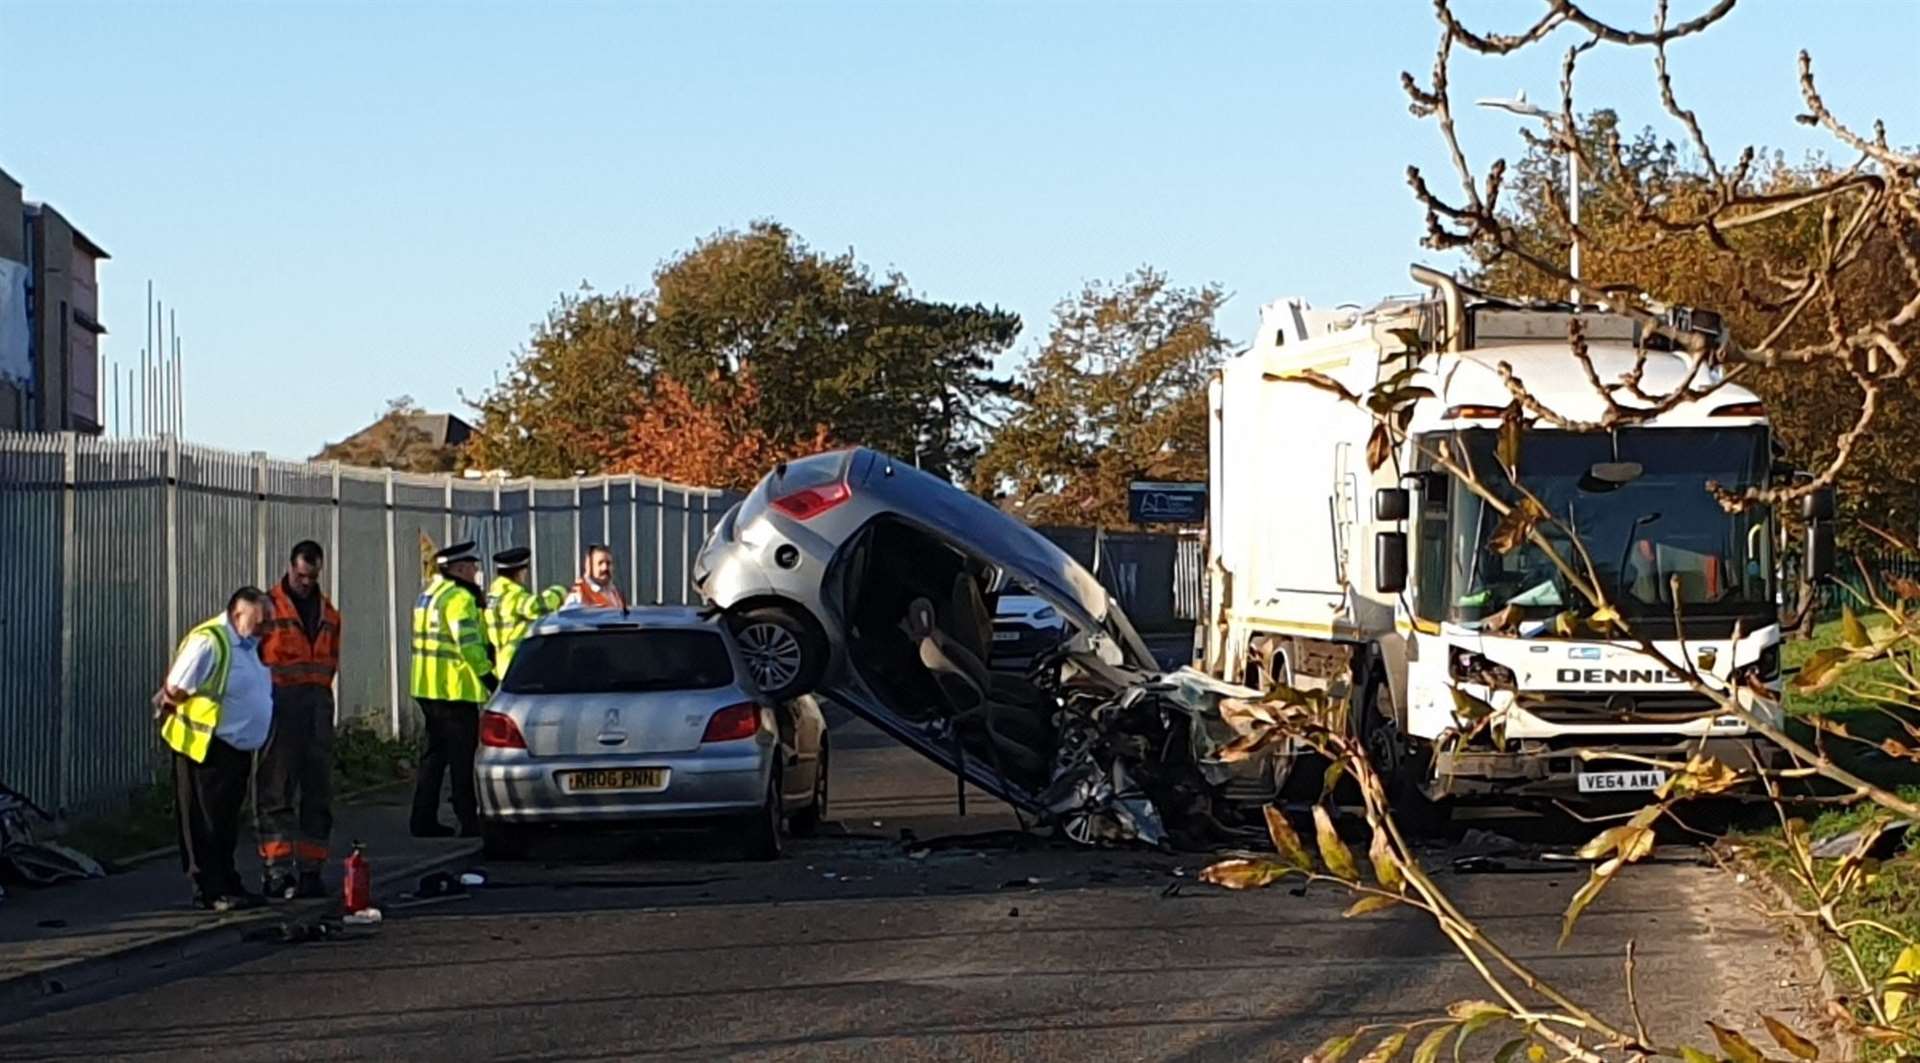 Tile Kiln Lane in Cheriton, Folkestone, has been taped off following a crash. Picture: Steve Wood